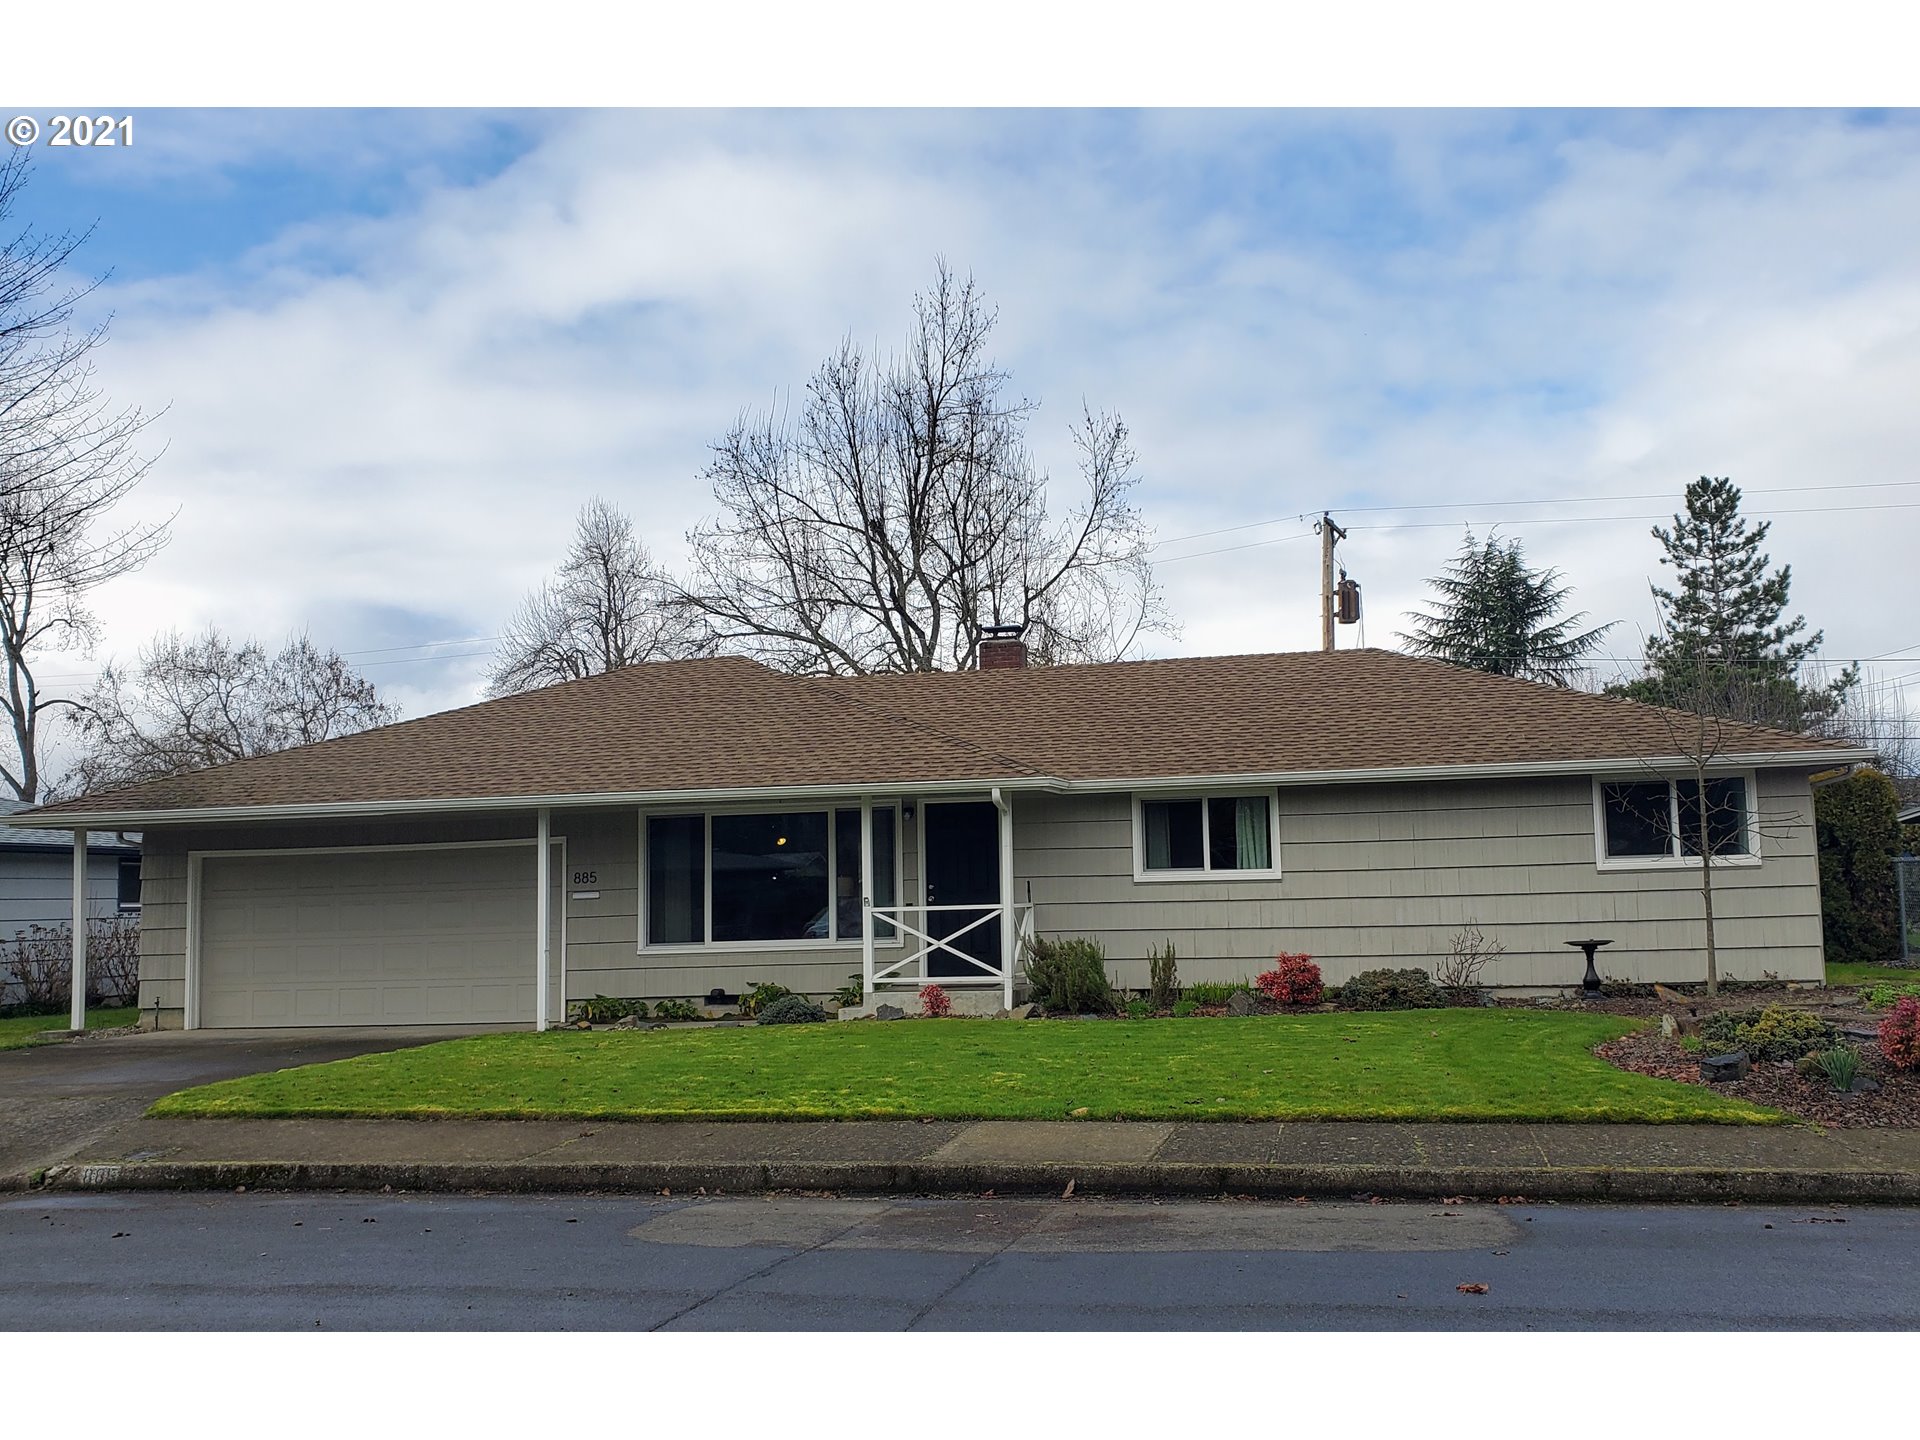 885 E 39TH AVE (1 of 26)